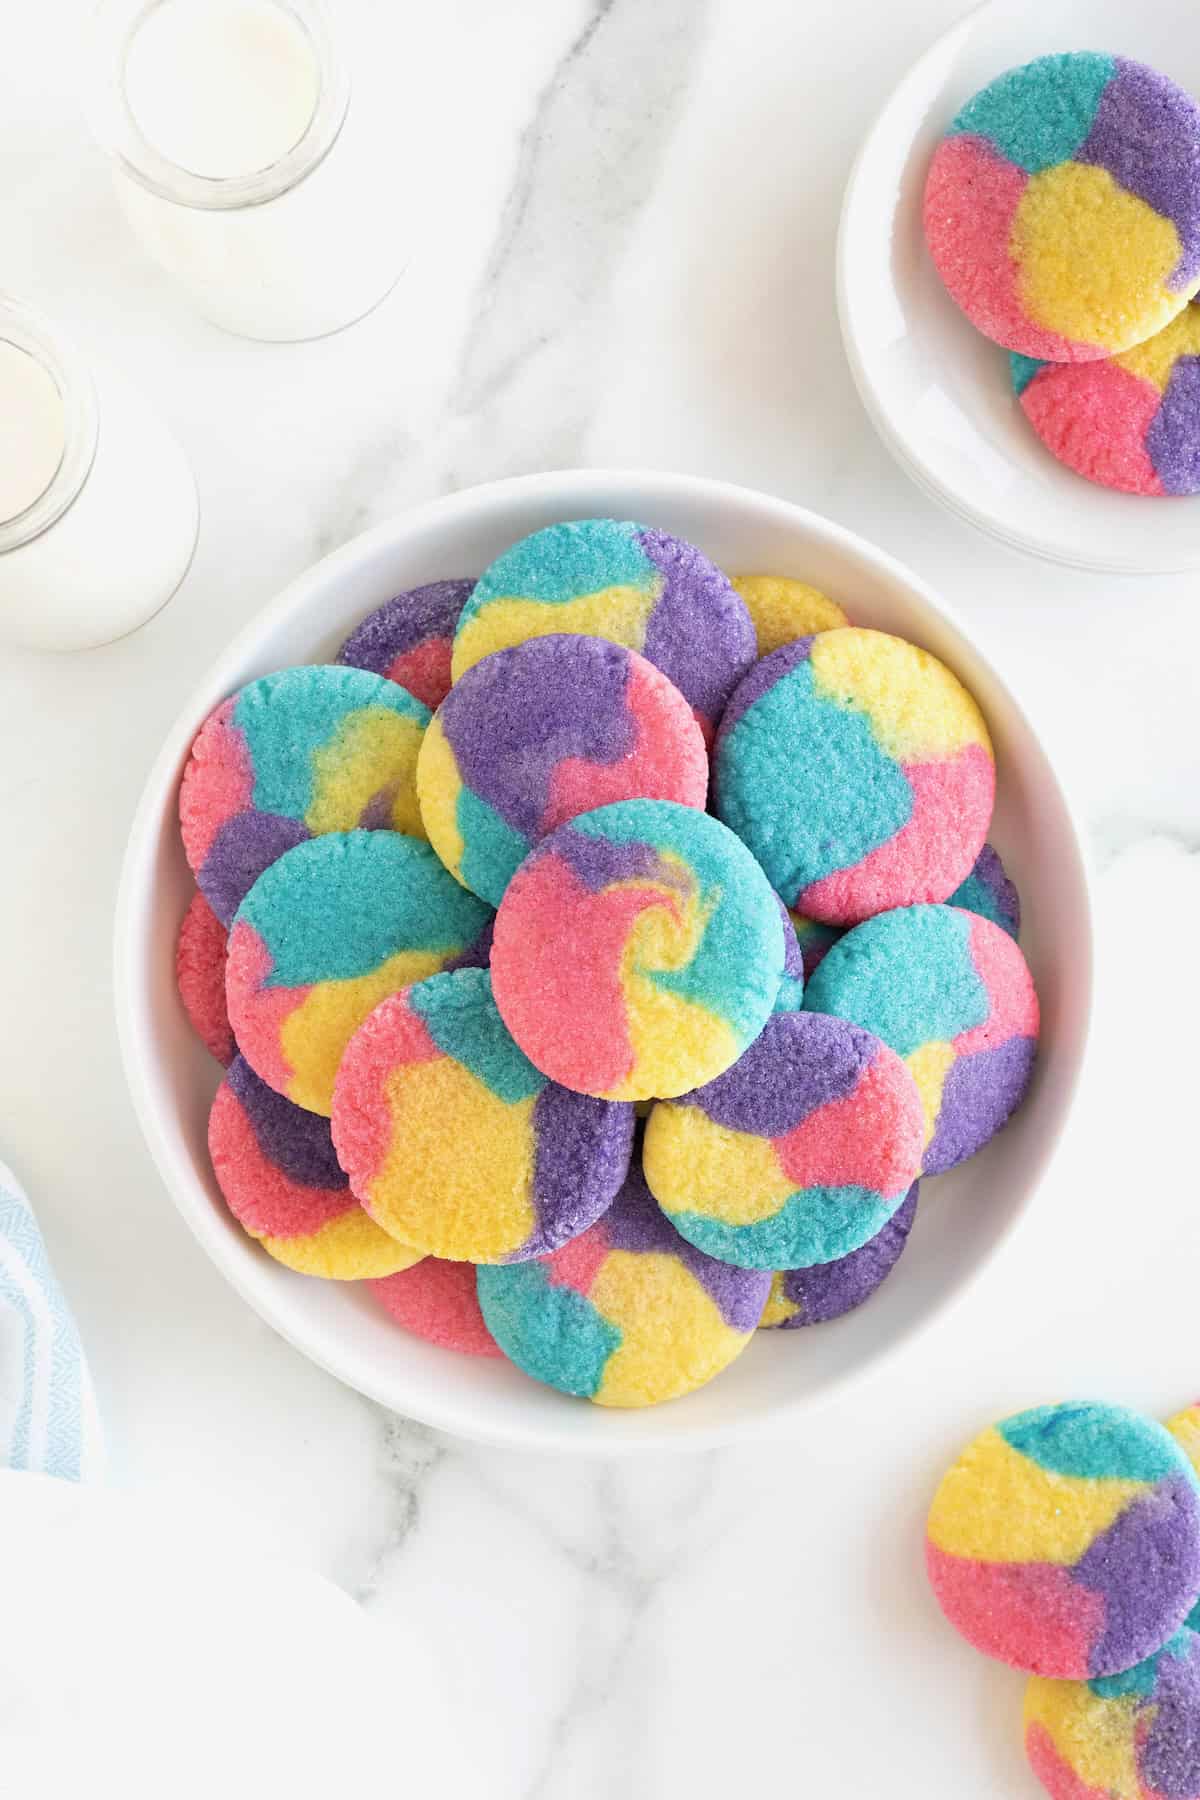 A large serving plate stacked with colorful sugar cookies with pink, purple, blue and yellow swirls in them.